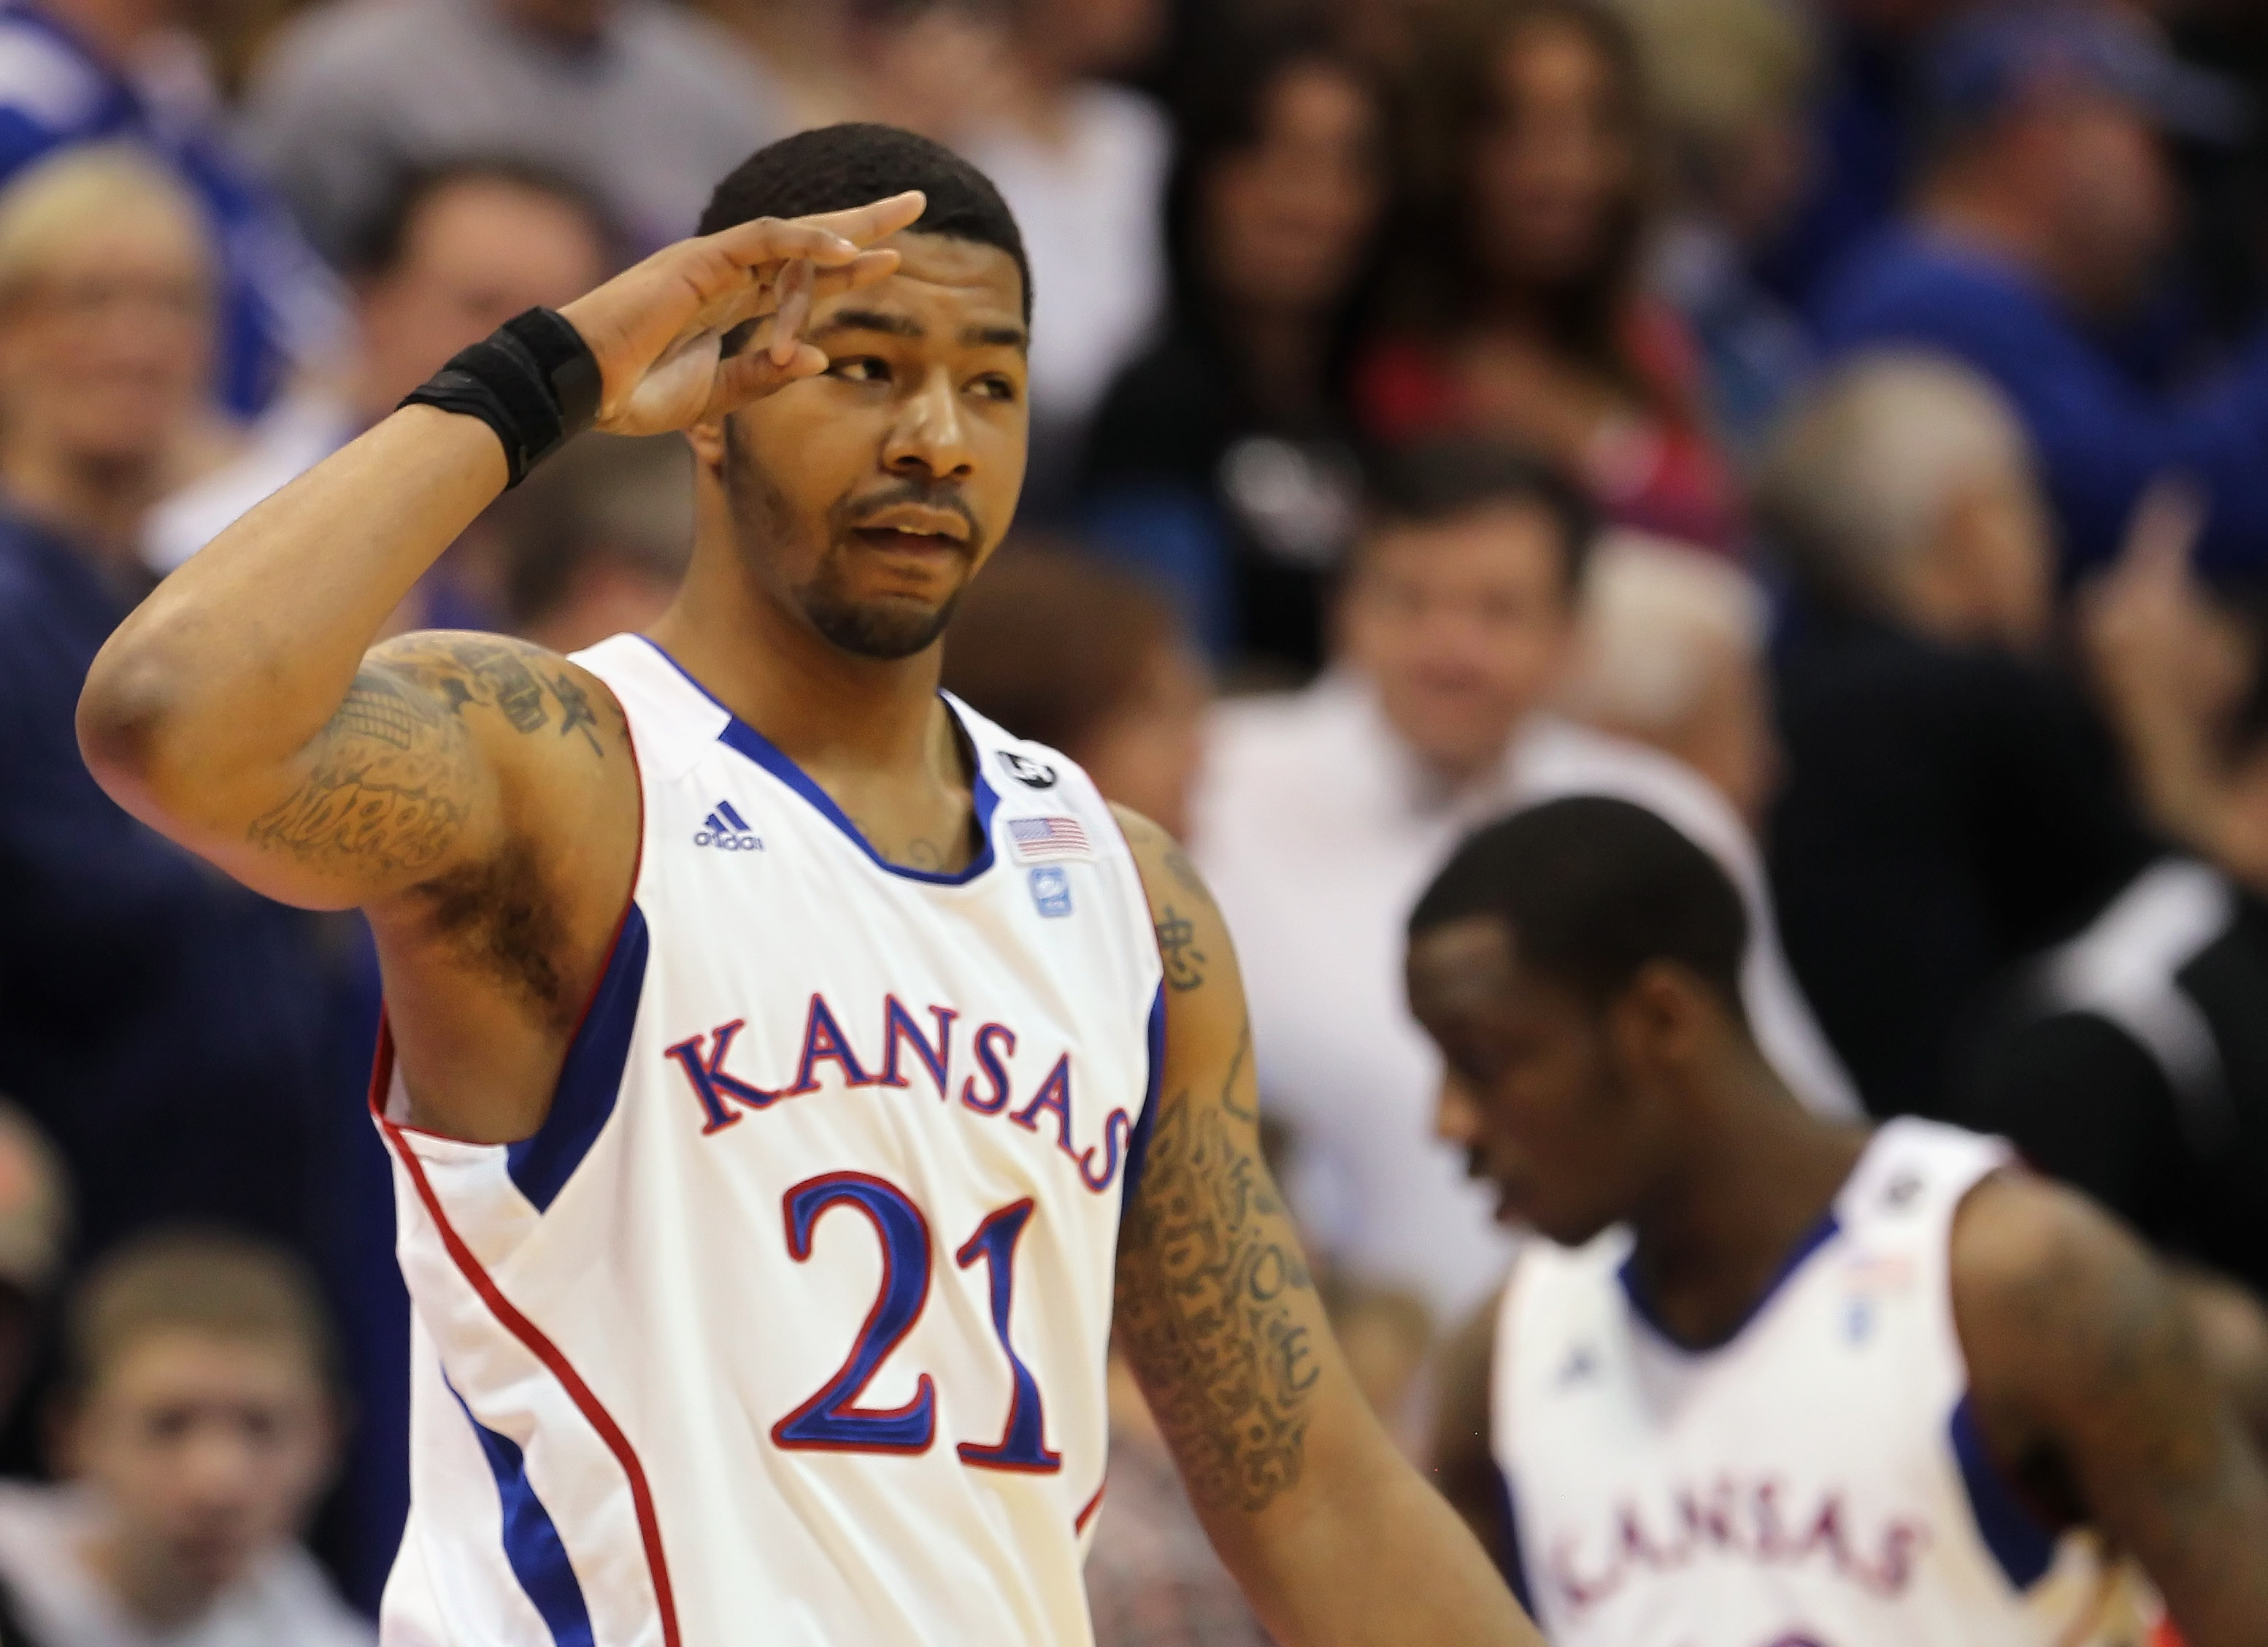 LAWRENCE, KS - FEBRUARY 12:  Markieff Morris #21 of the Kansas Jayhawks slautes the crowd during the game against the Iowa State Cyclones on February 12, 2011 at Allen Fieldhouse in Lawrence, Kansas.  (Photo by Jamie Squire/Getty Images)